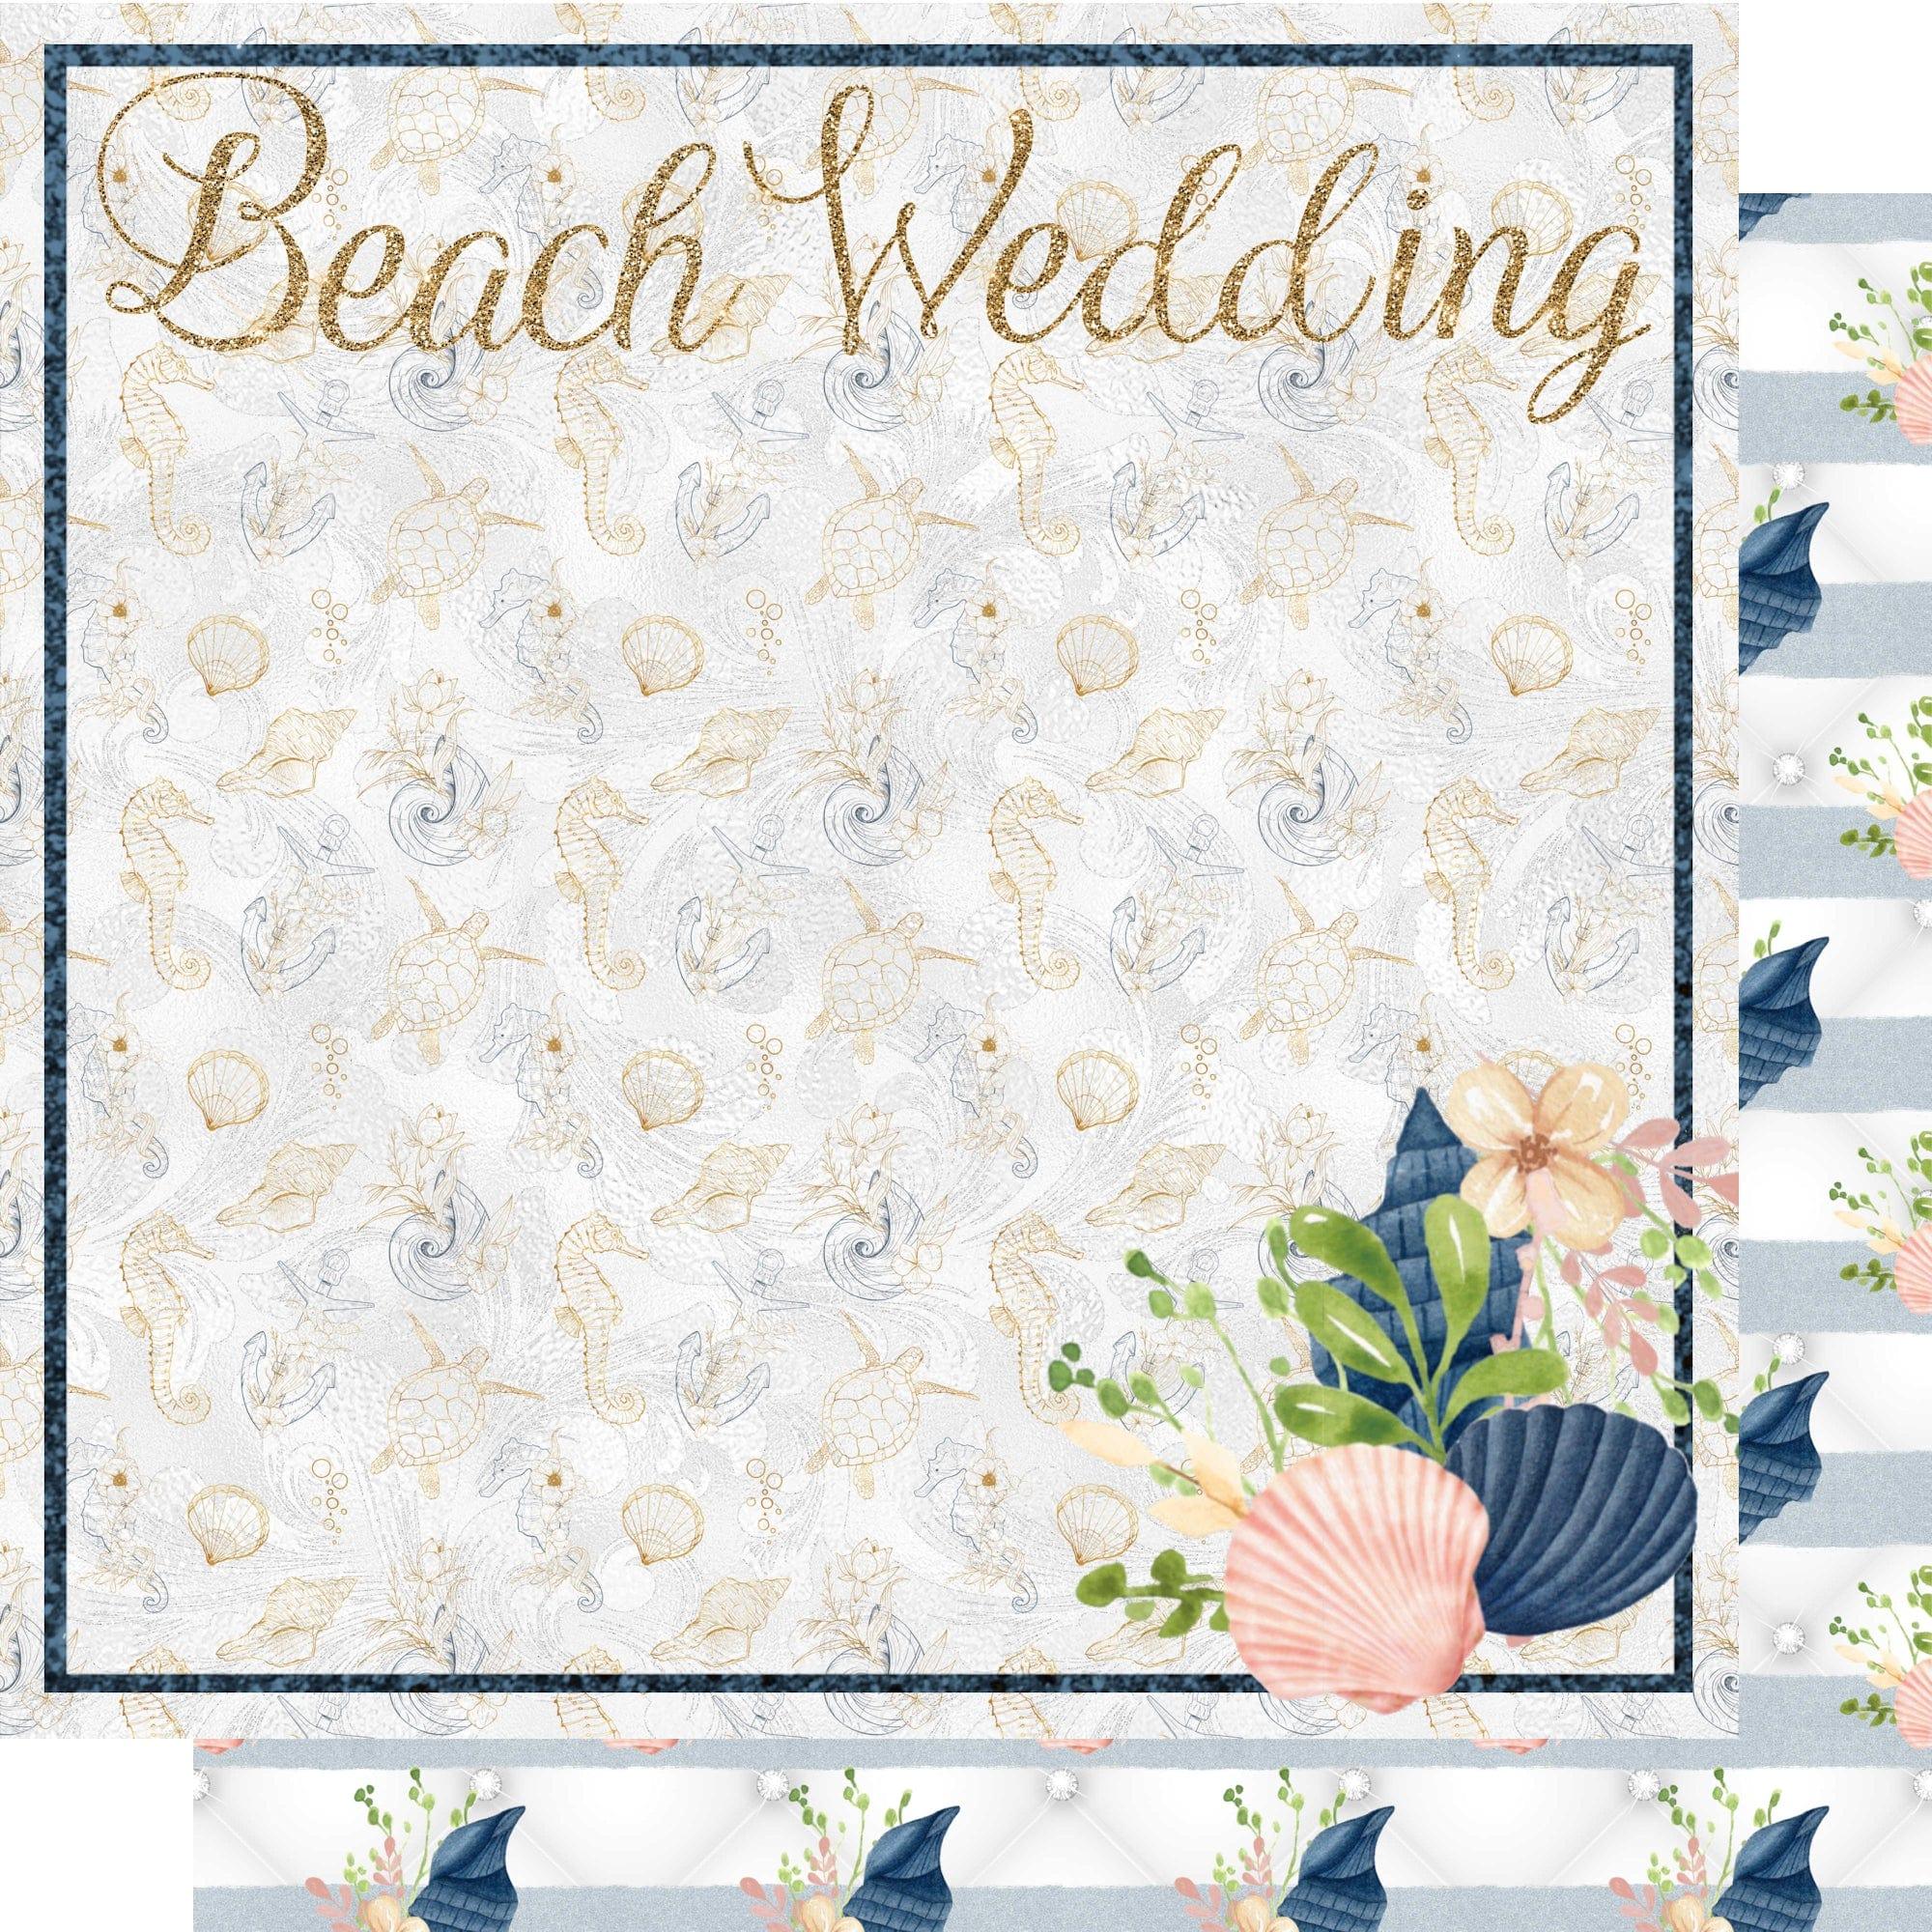 Seaside Wedding Collection Beach Wedding 12 x 12 Double-Sided Scrapbook Paper by SSC Designs - Scrapbook Supply Companies